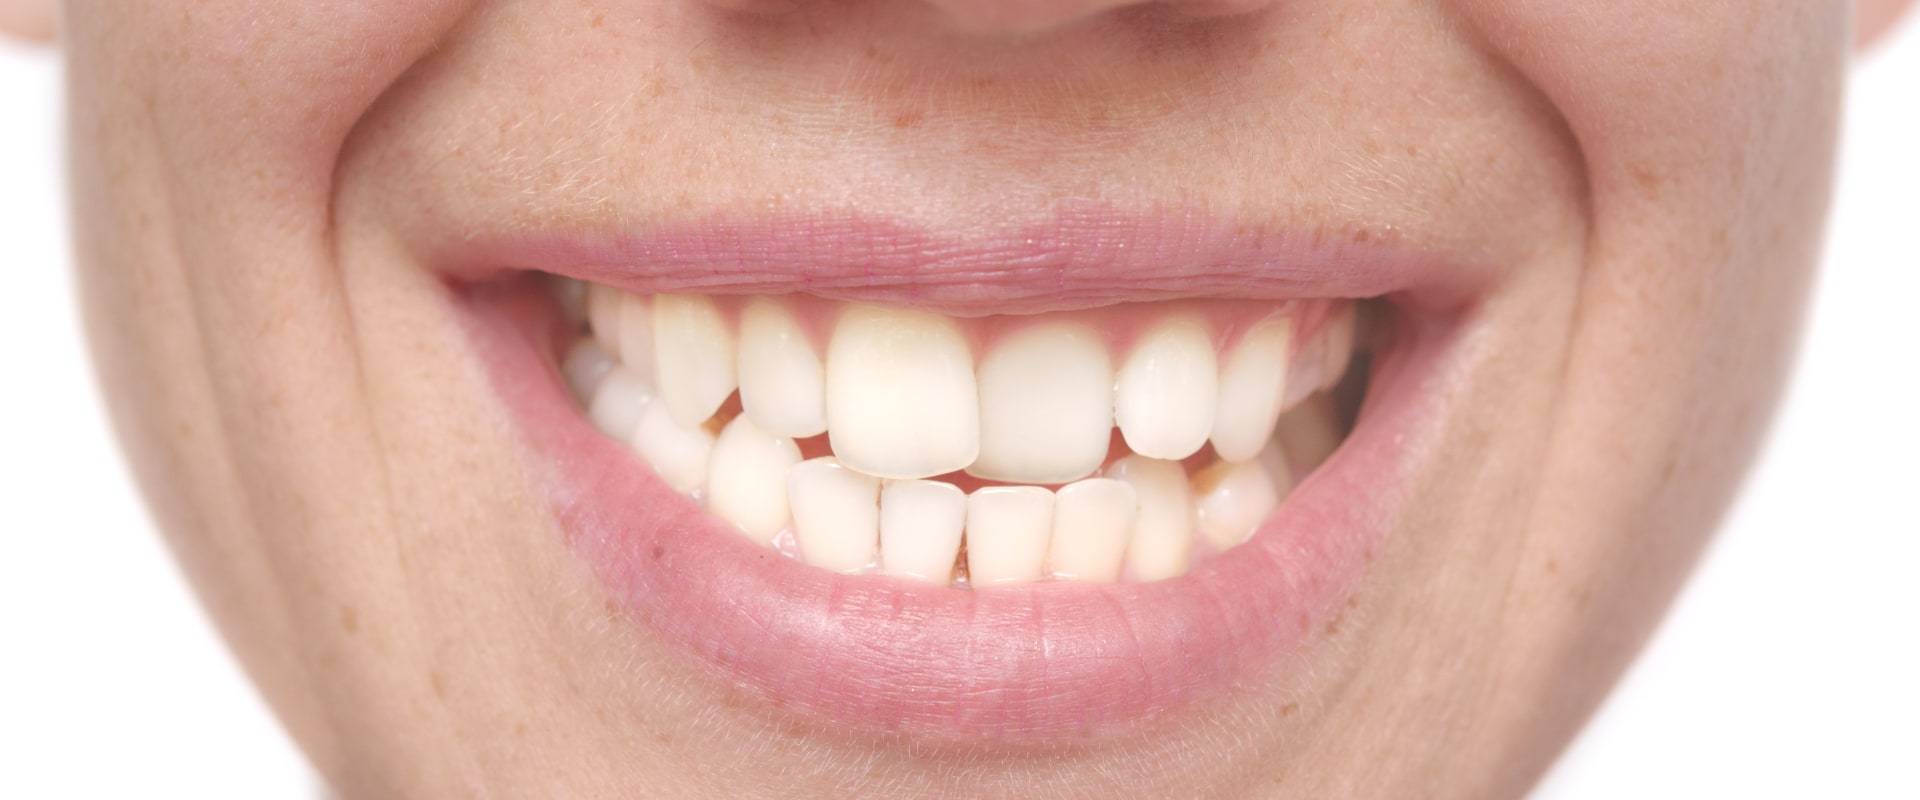 Smile Makeover for Crooked Teeth: Types of Treatments Explained